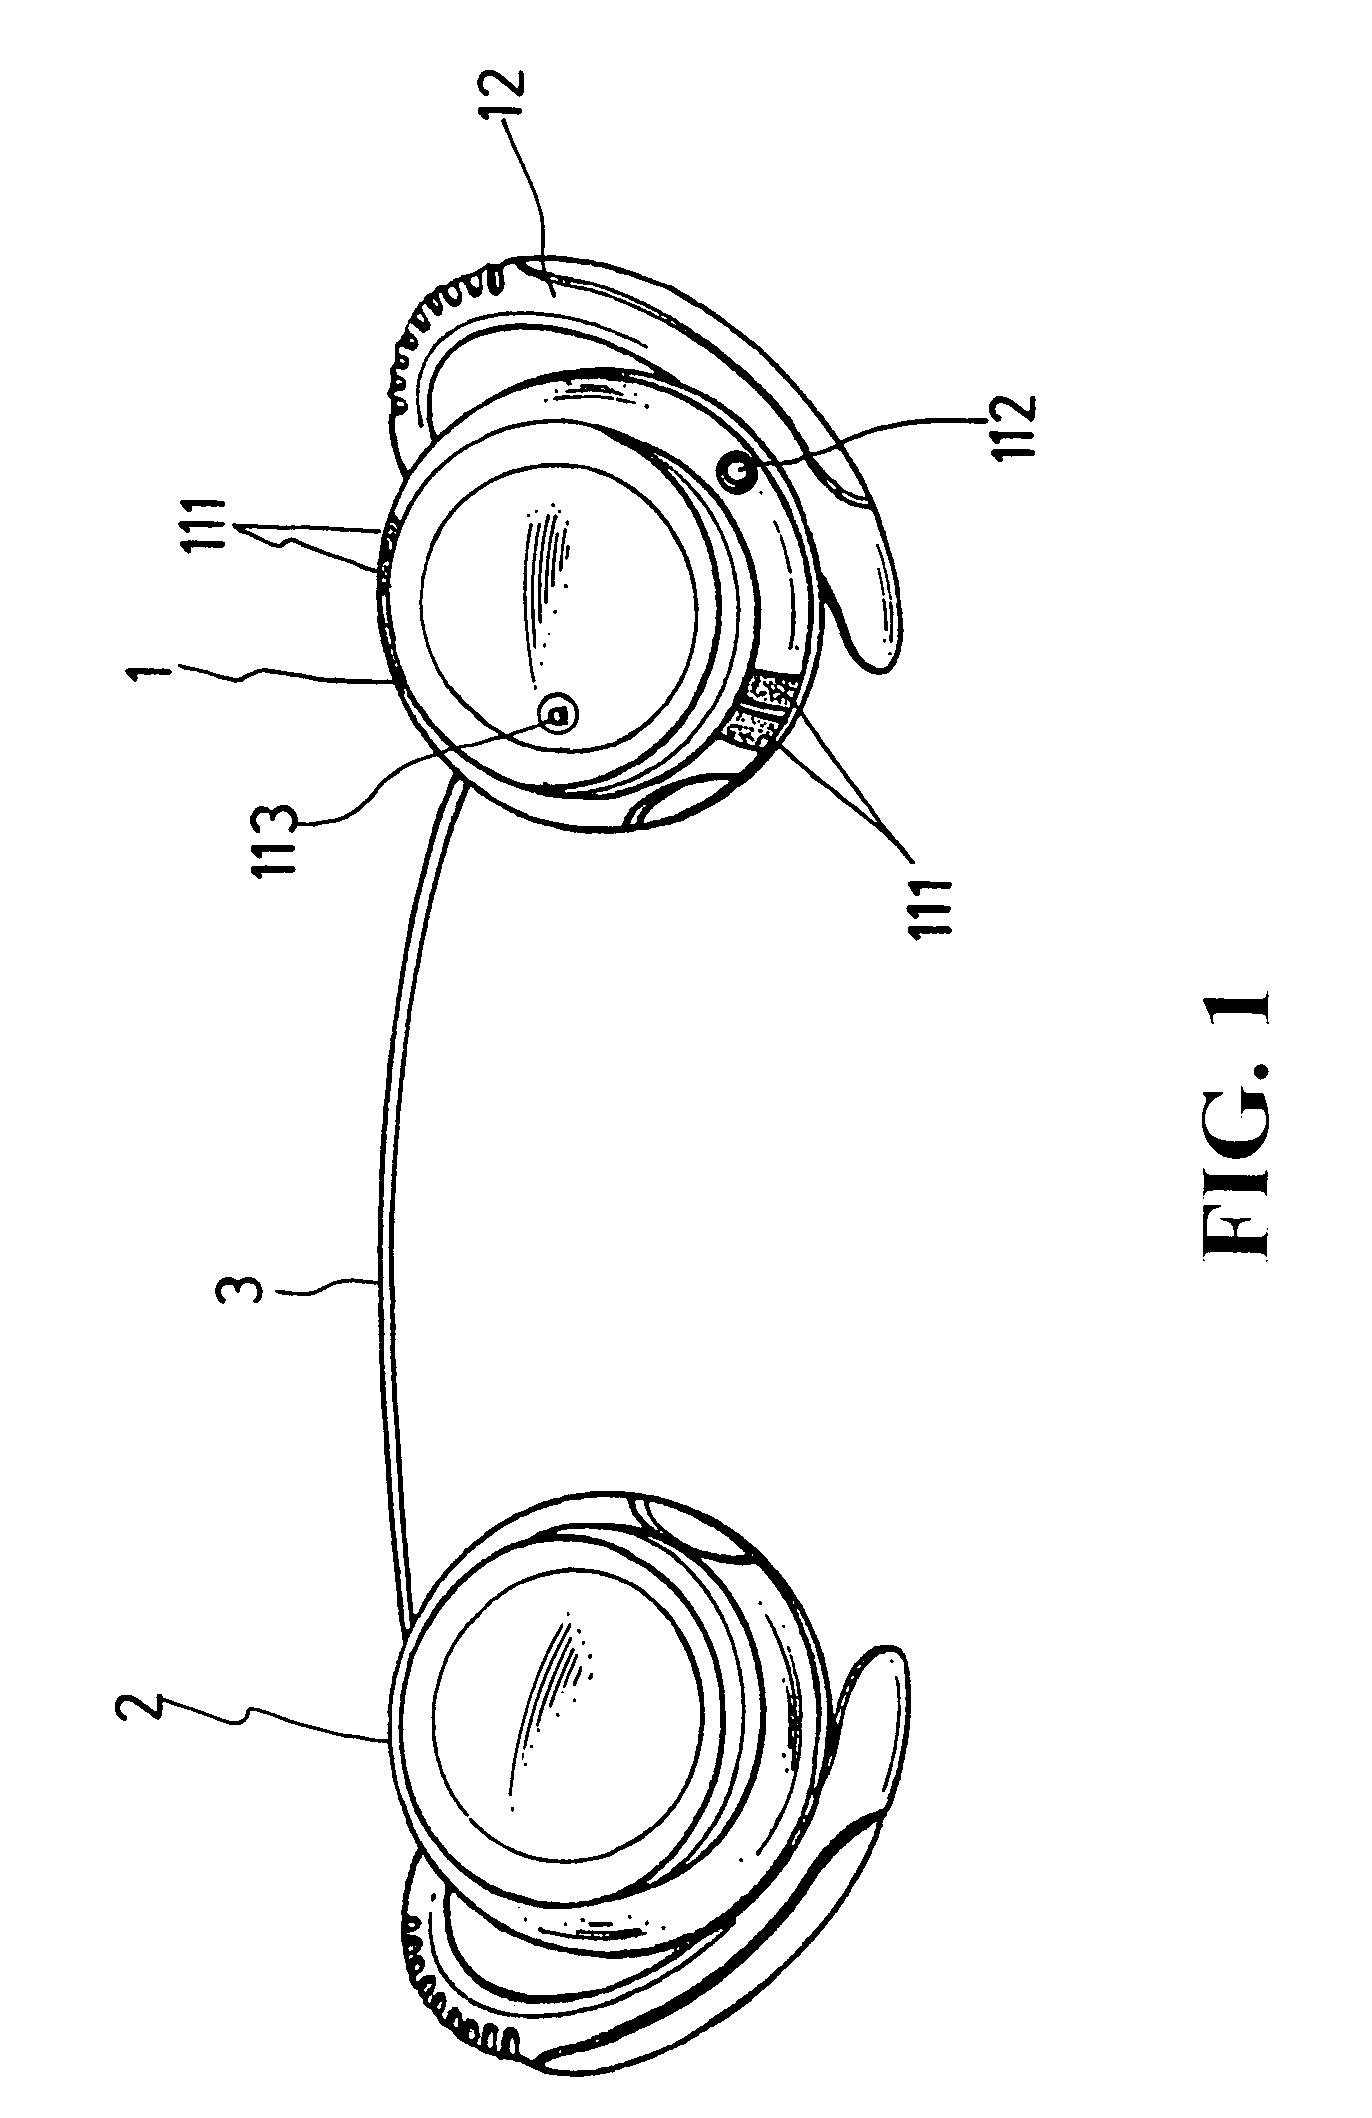 Headset structure with built-in audio source